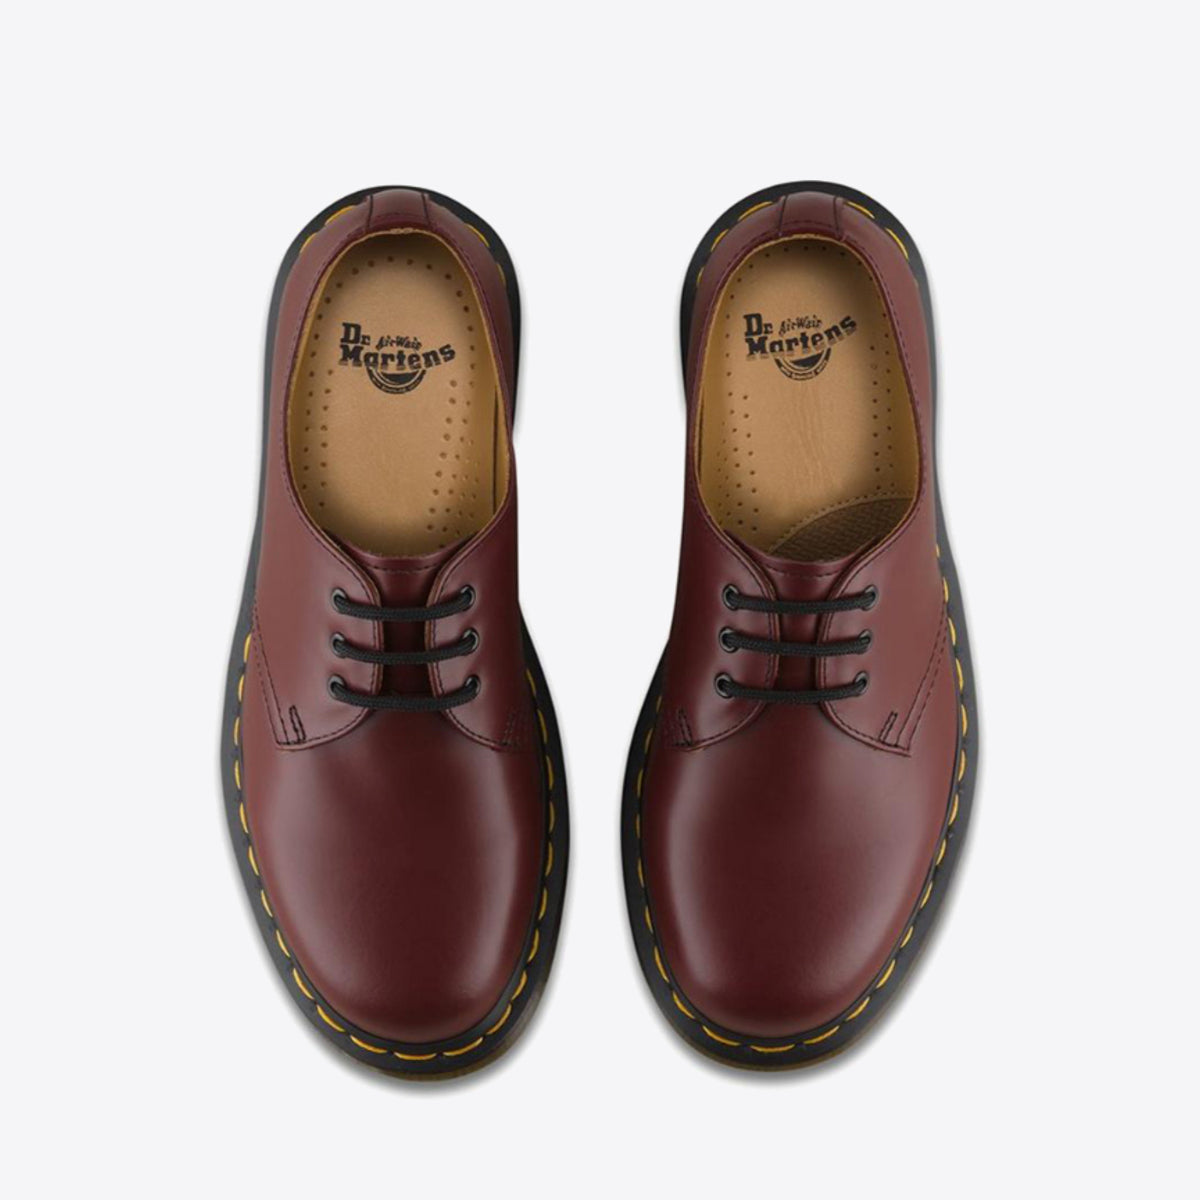 DR MARTENS 1461 Smooth 3 Eye Shoe Cherry Red - Image 4